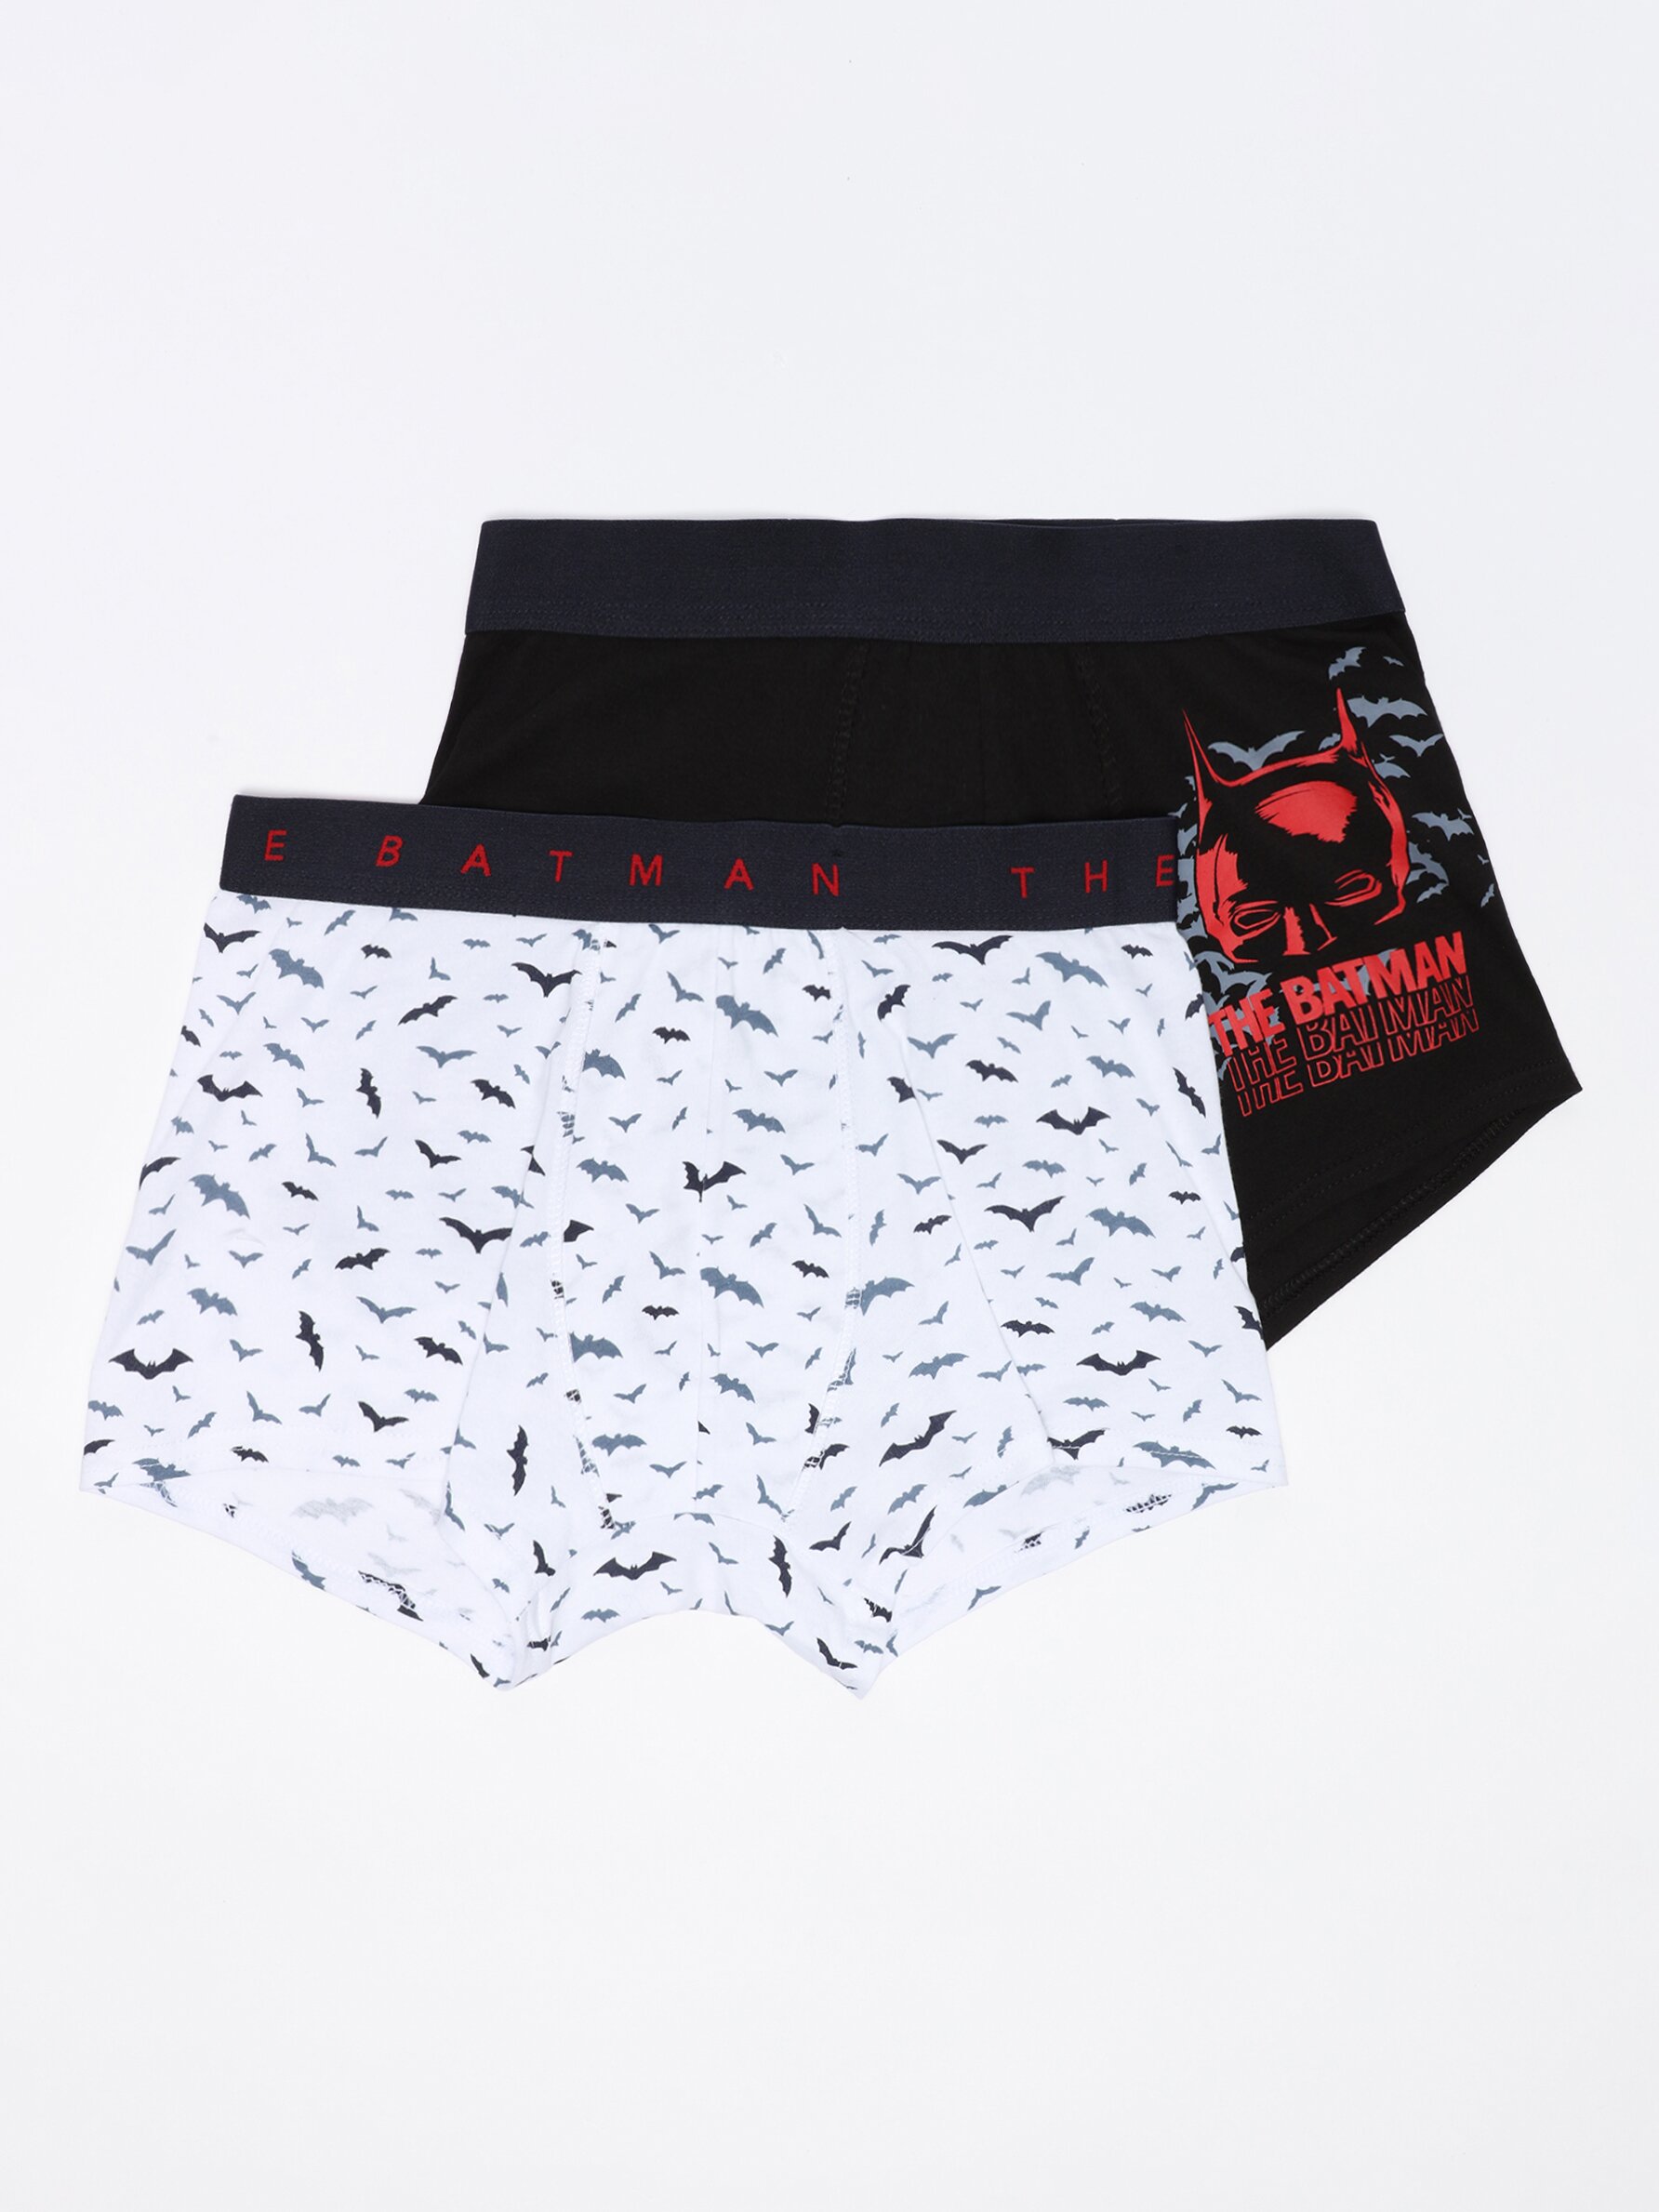 Pack of 2 pairs of Batman ©DC boxer briefs - Boxers - UNDERWEAR - CLOTHING  - MAN - | Lefties Portugal